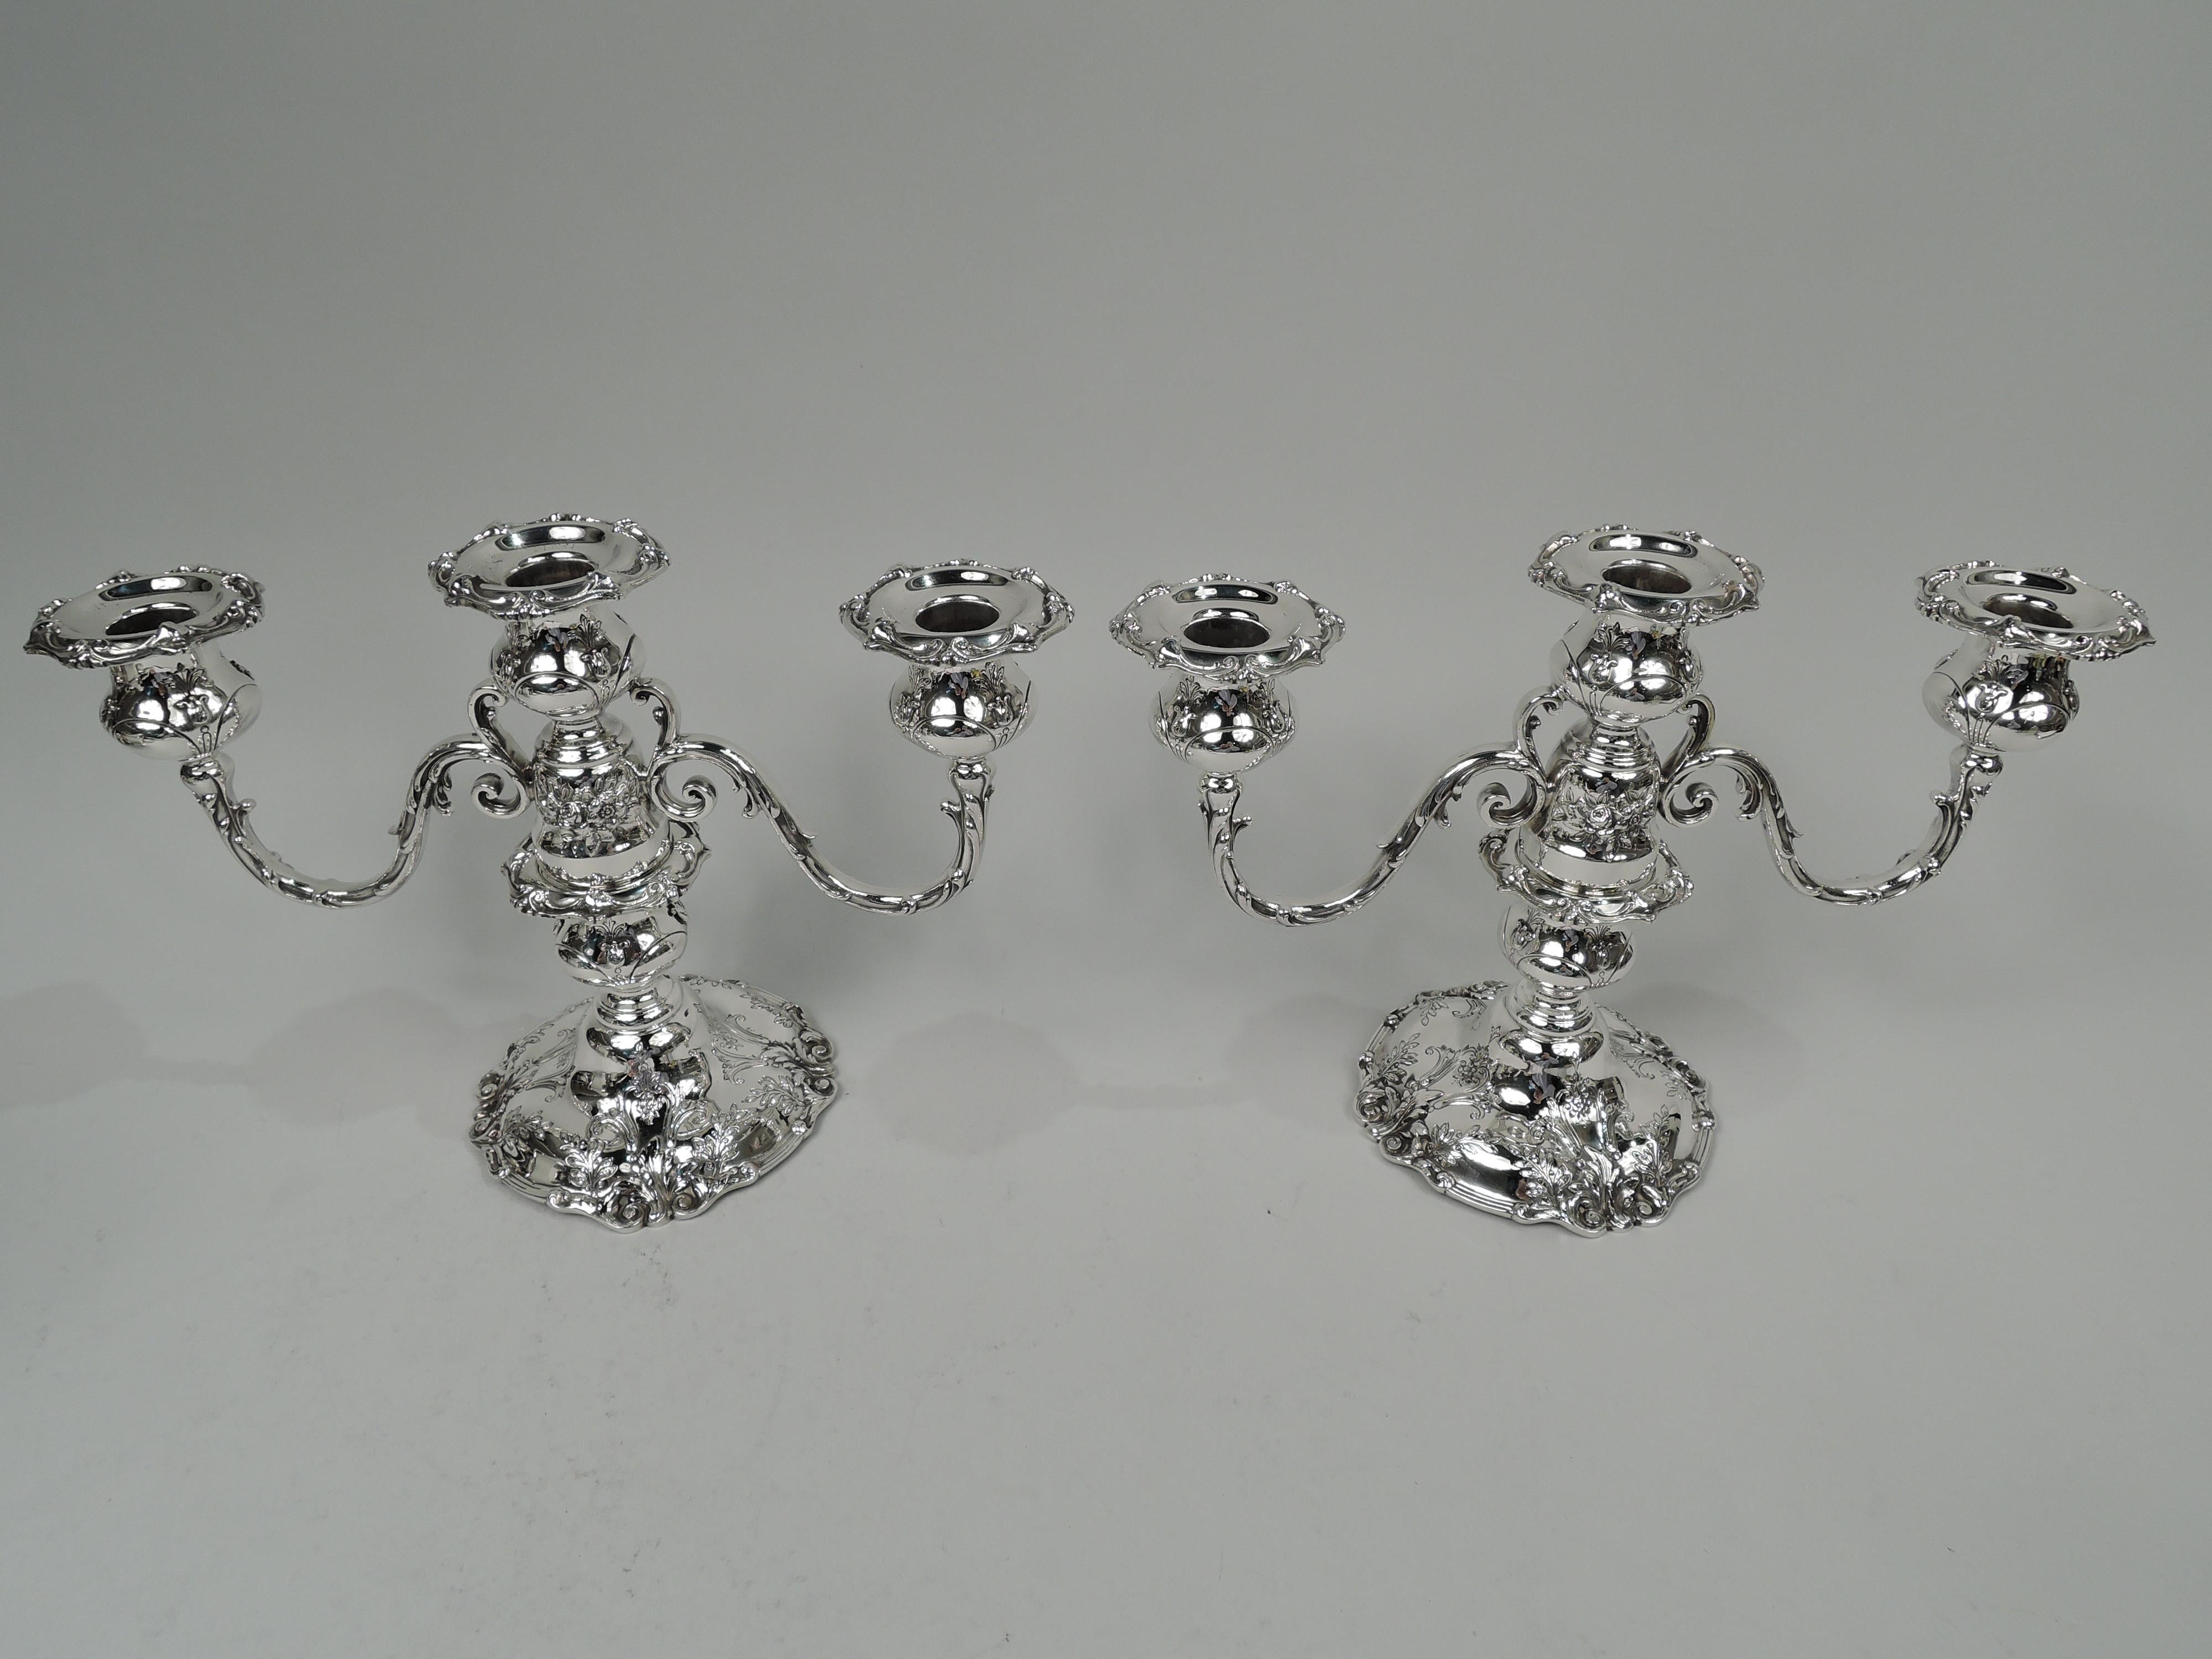 Pair of Francis I sterling silver low 3-light candelabra. Made by Reed & Barton in Taunton, Mass. in 1952. Each: Central socket on bell-form base to which are mounted 2 split-mounted and leaf-wrapped arms, each terminating in single socket. Shaft